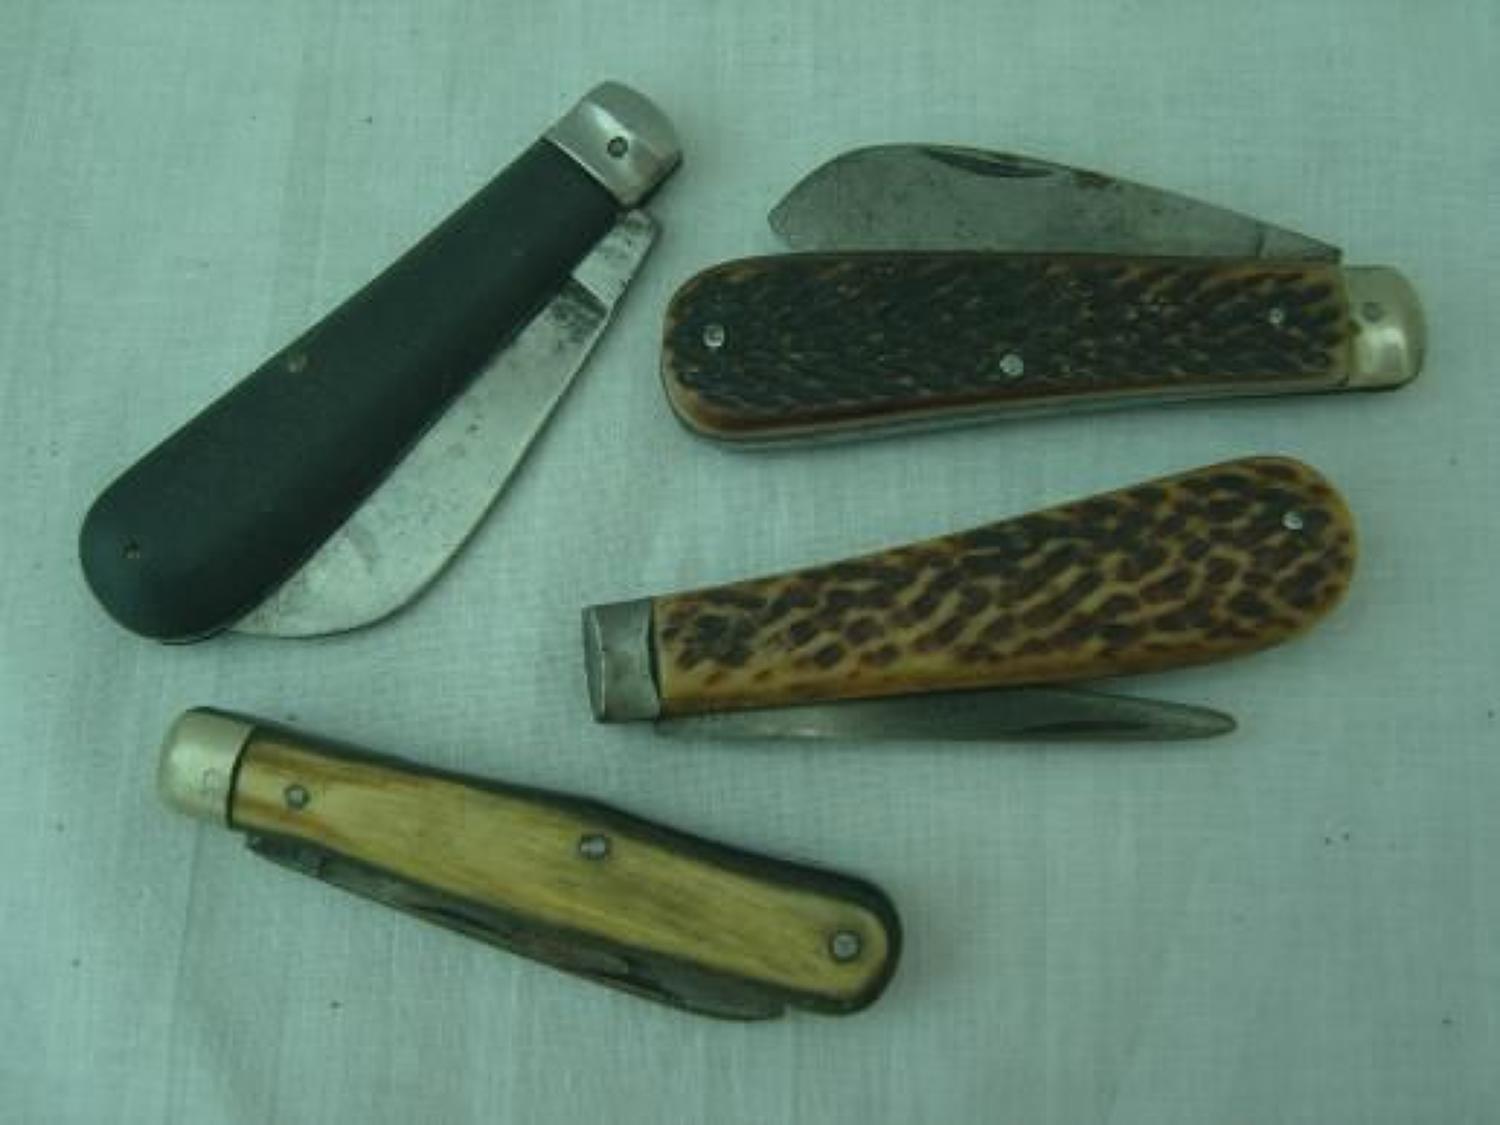 FOUR PRIVATE PURCHASE ARMY POCKET KNIVES